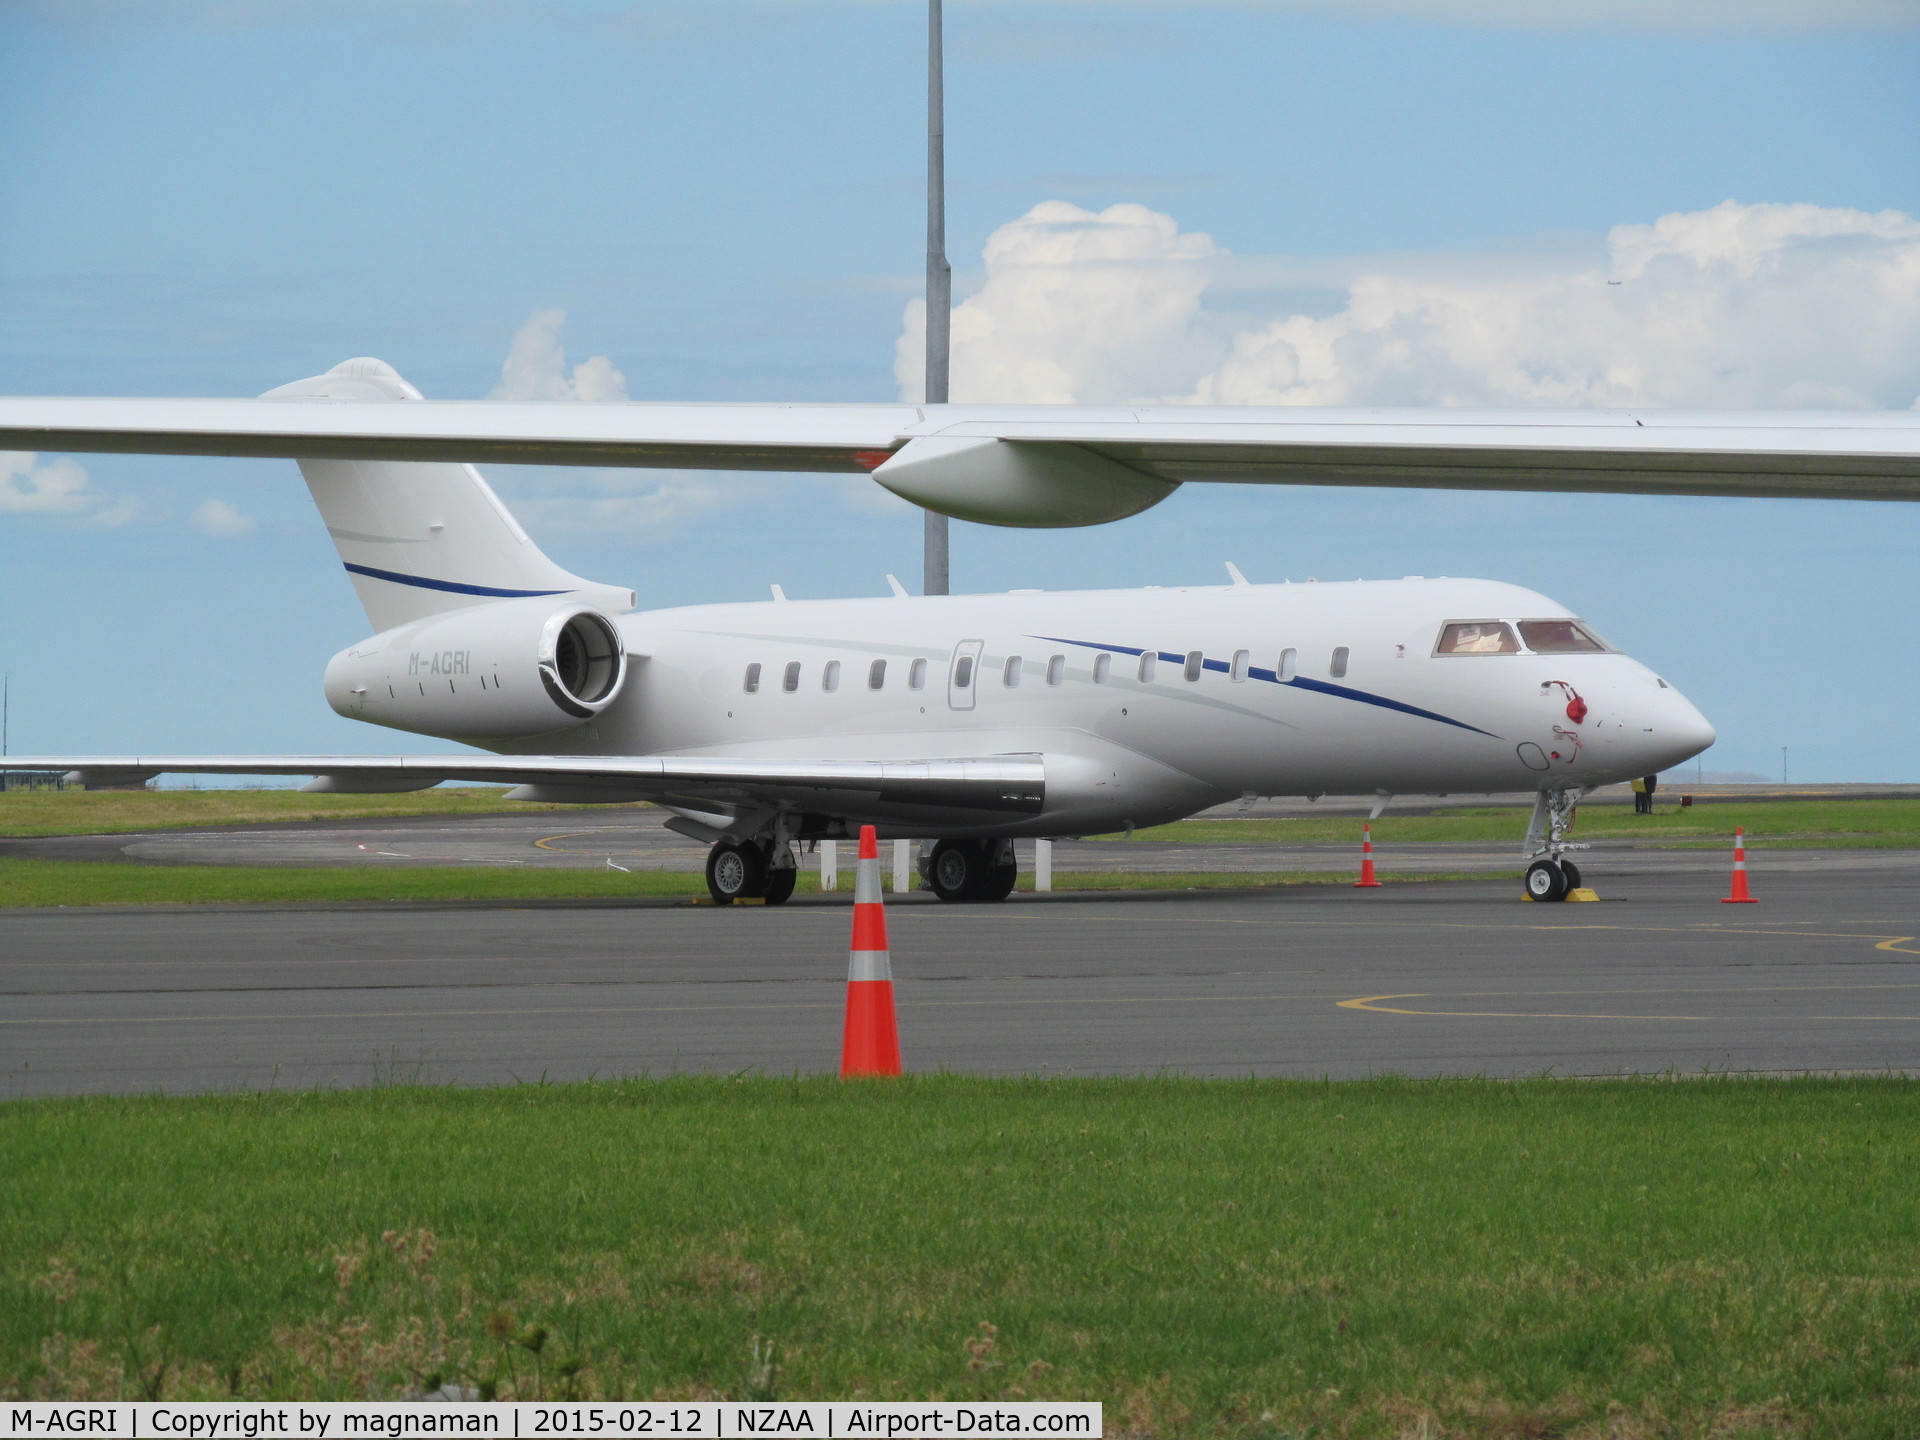 M-AGRI, 2014 Bombardier BD-700-1A11 Global 5000 C/N 9597, Still at AKL (leaves today) seen under wing of M-AAAL